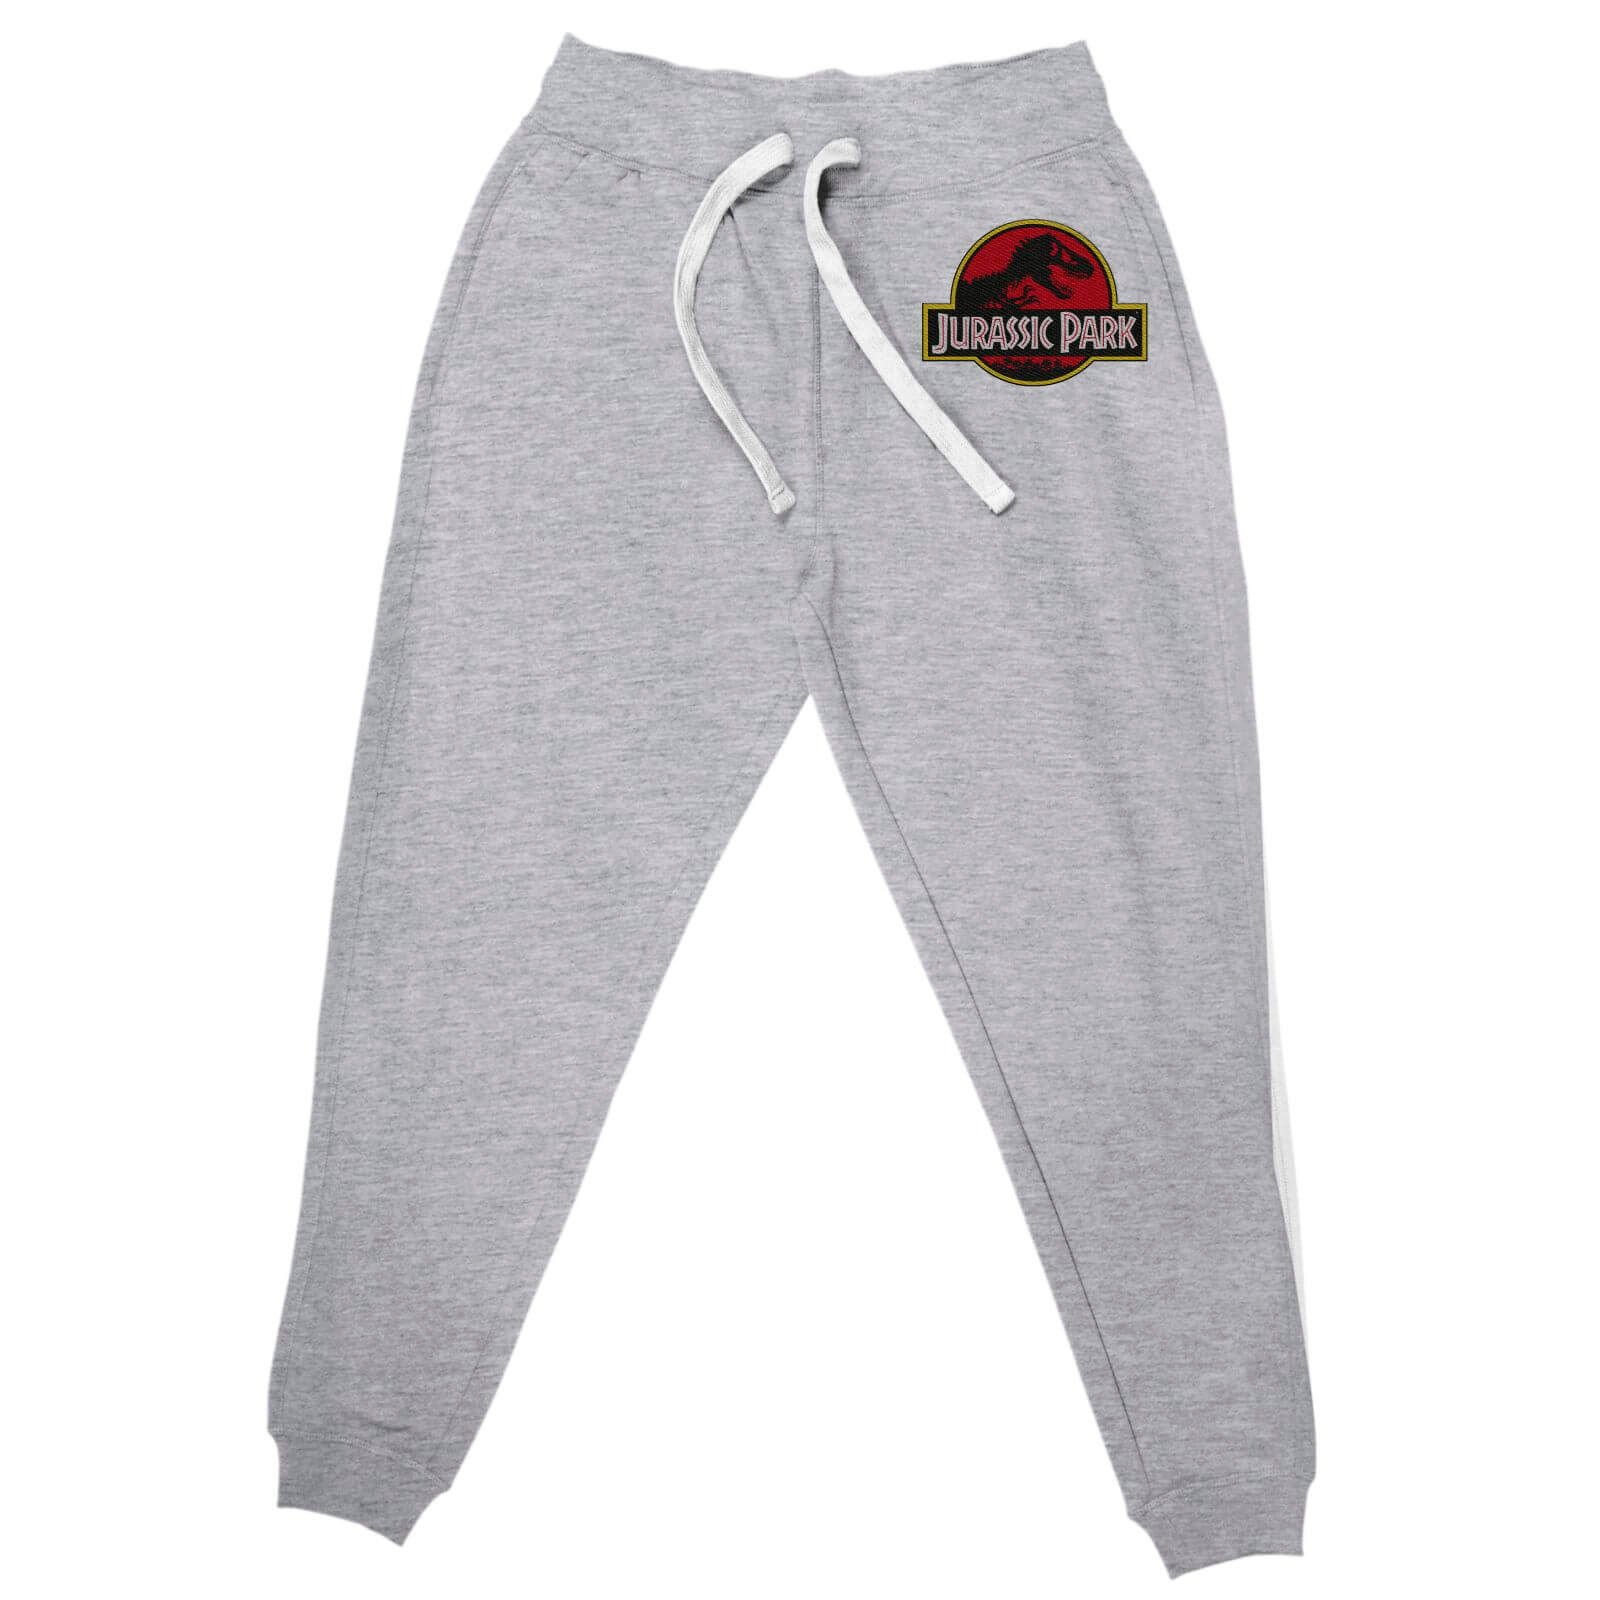 Jurassic Park Embroidered Unisex Joggers - Grey - S